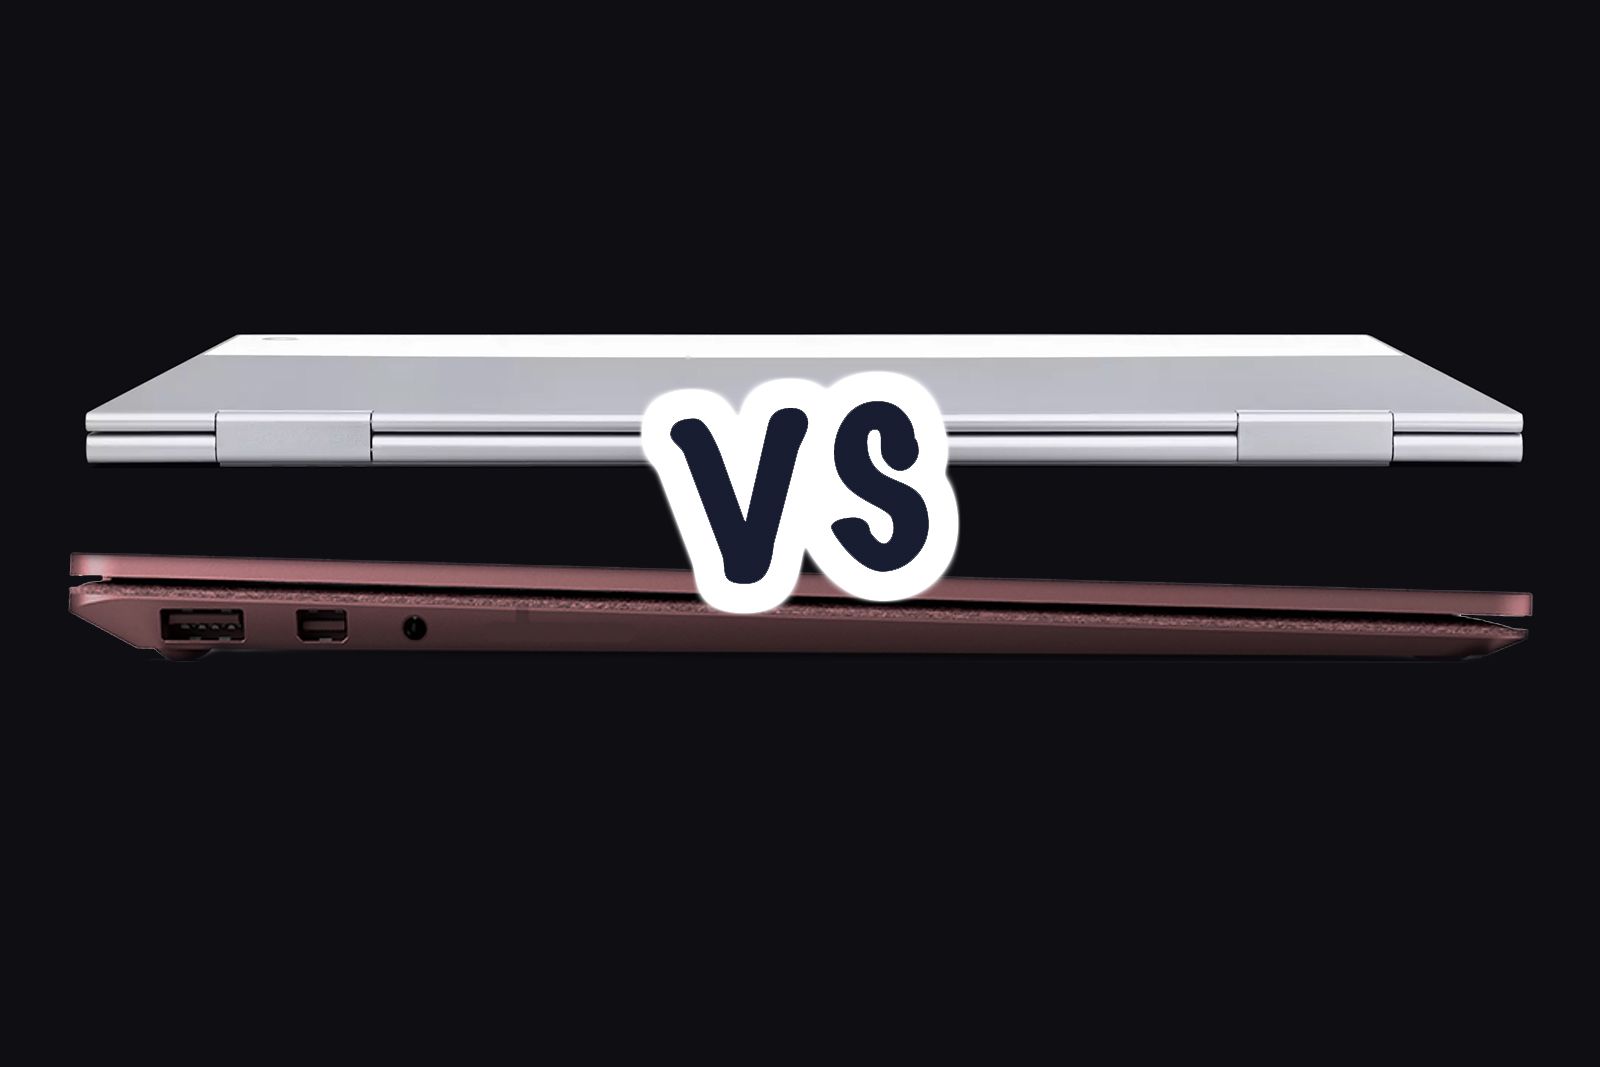 Google Pixelbook vs Microsoft Surface Laptop Whats the difference image 1